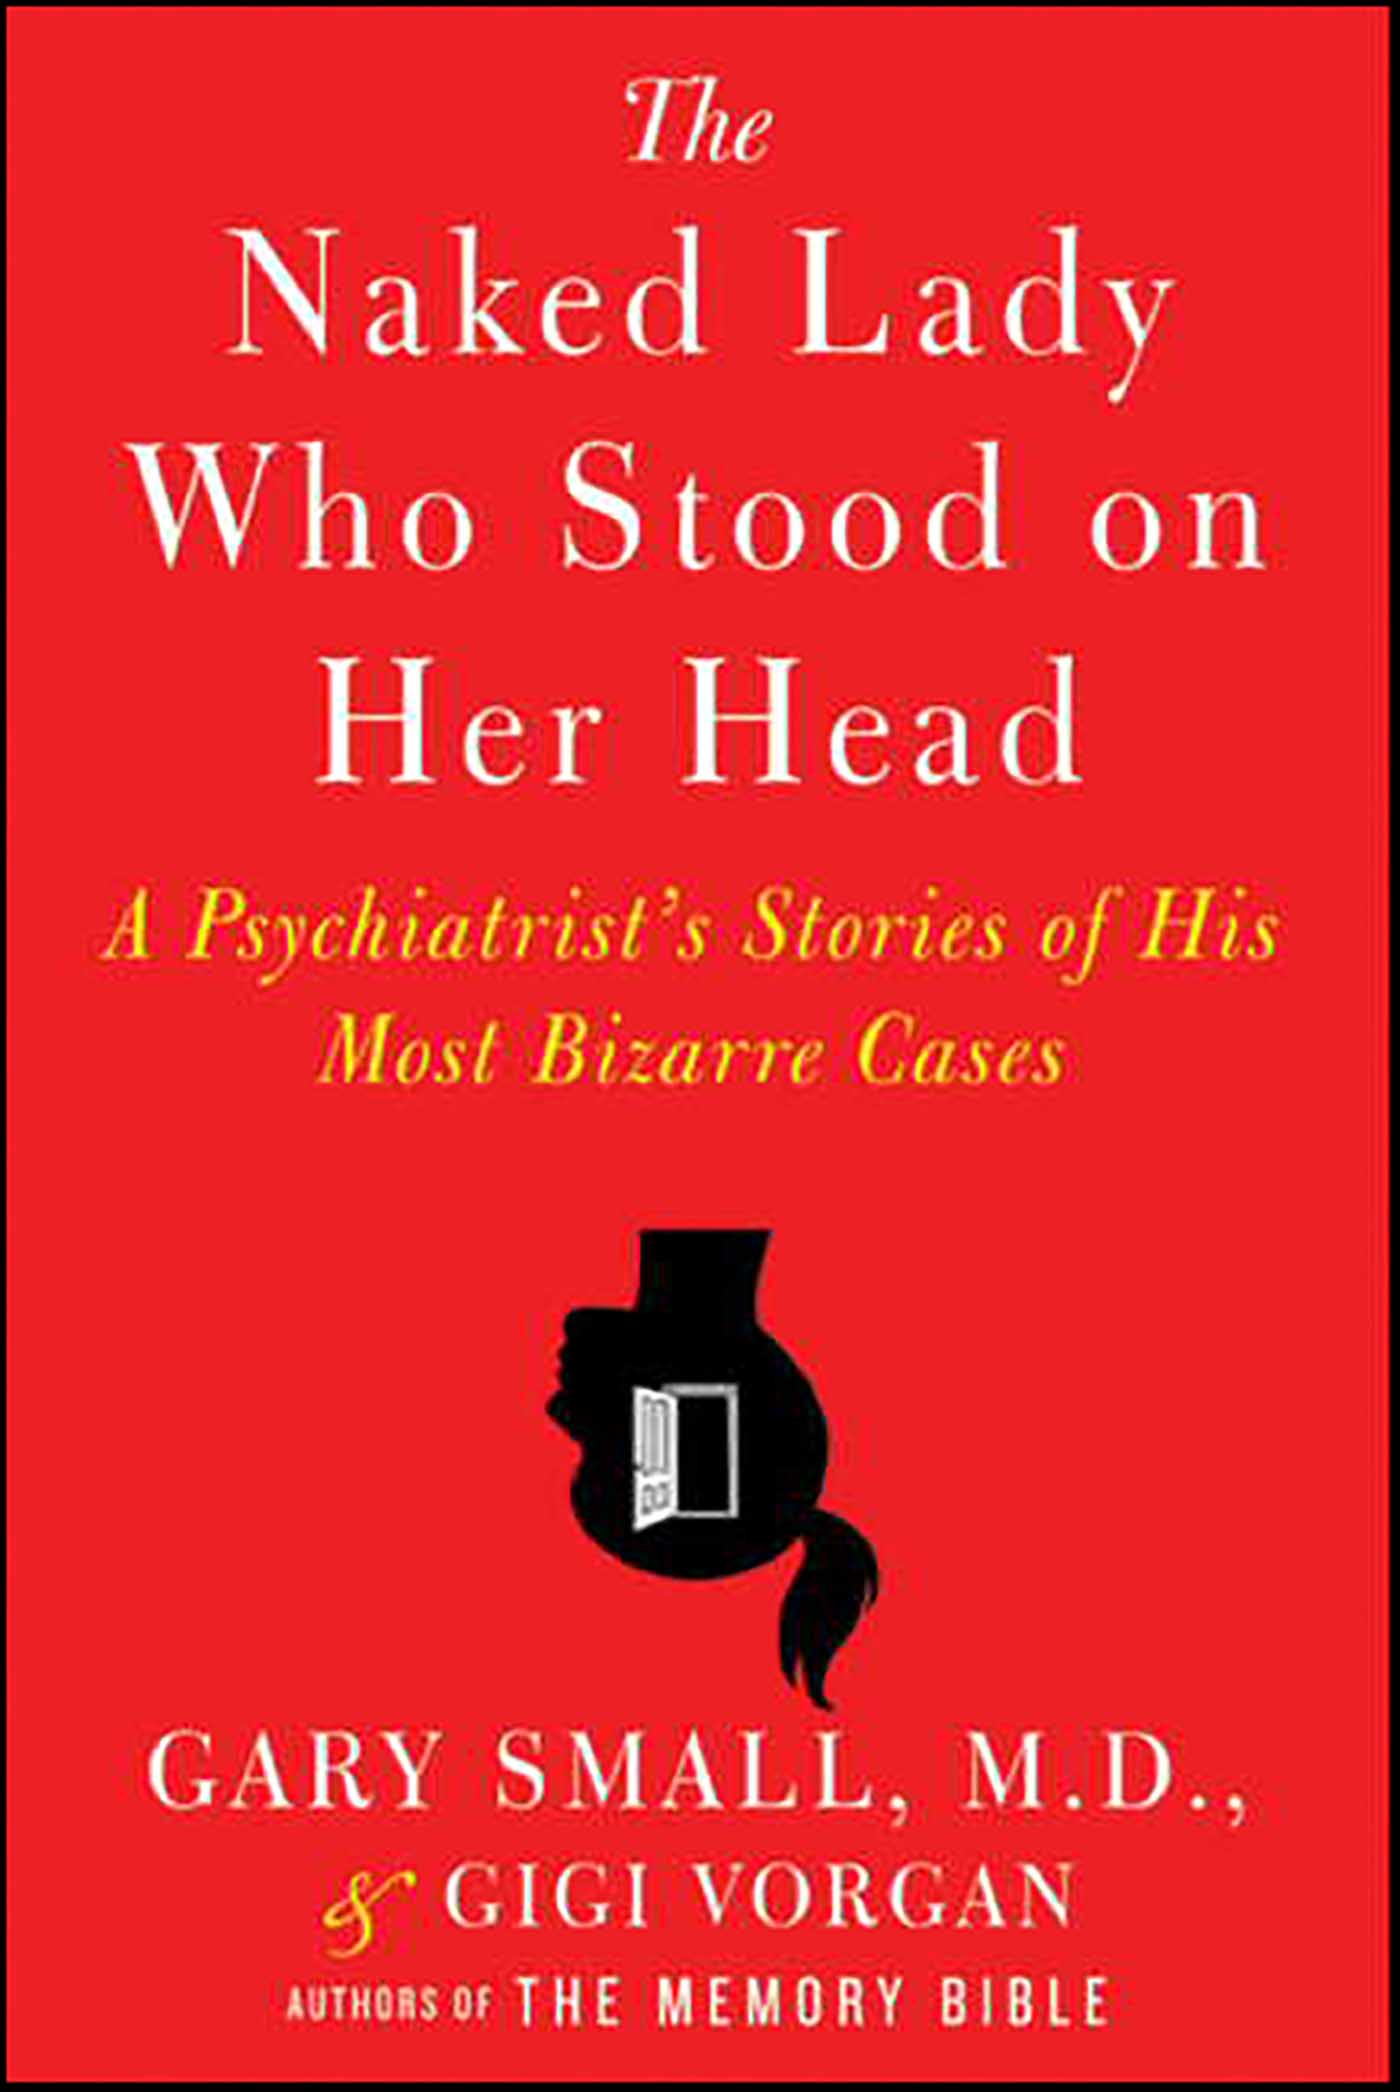 The naked lady who stood on her head a psychiatrist's stories of his most bizarre cases cover image